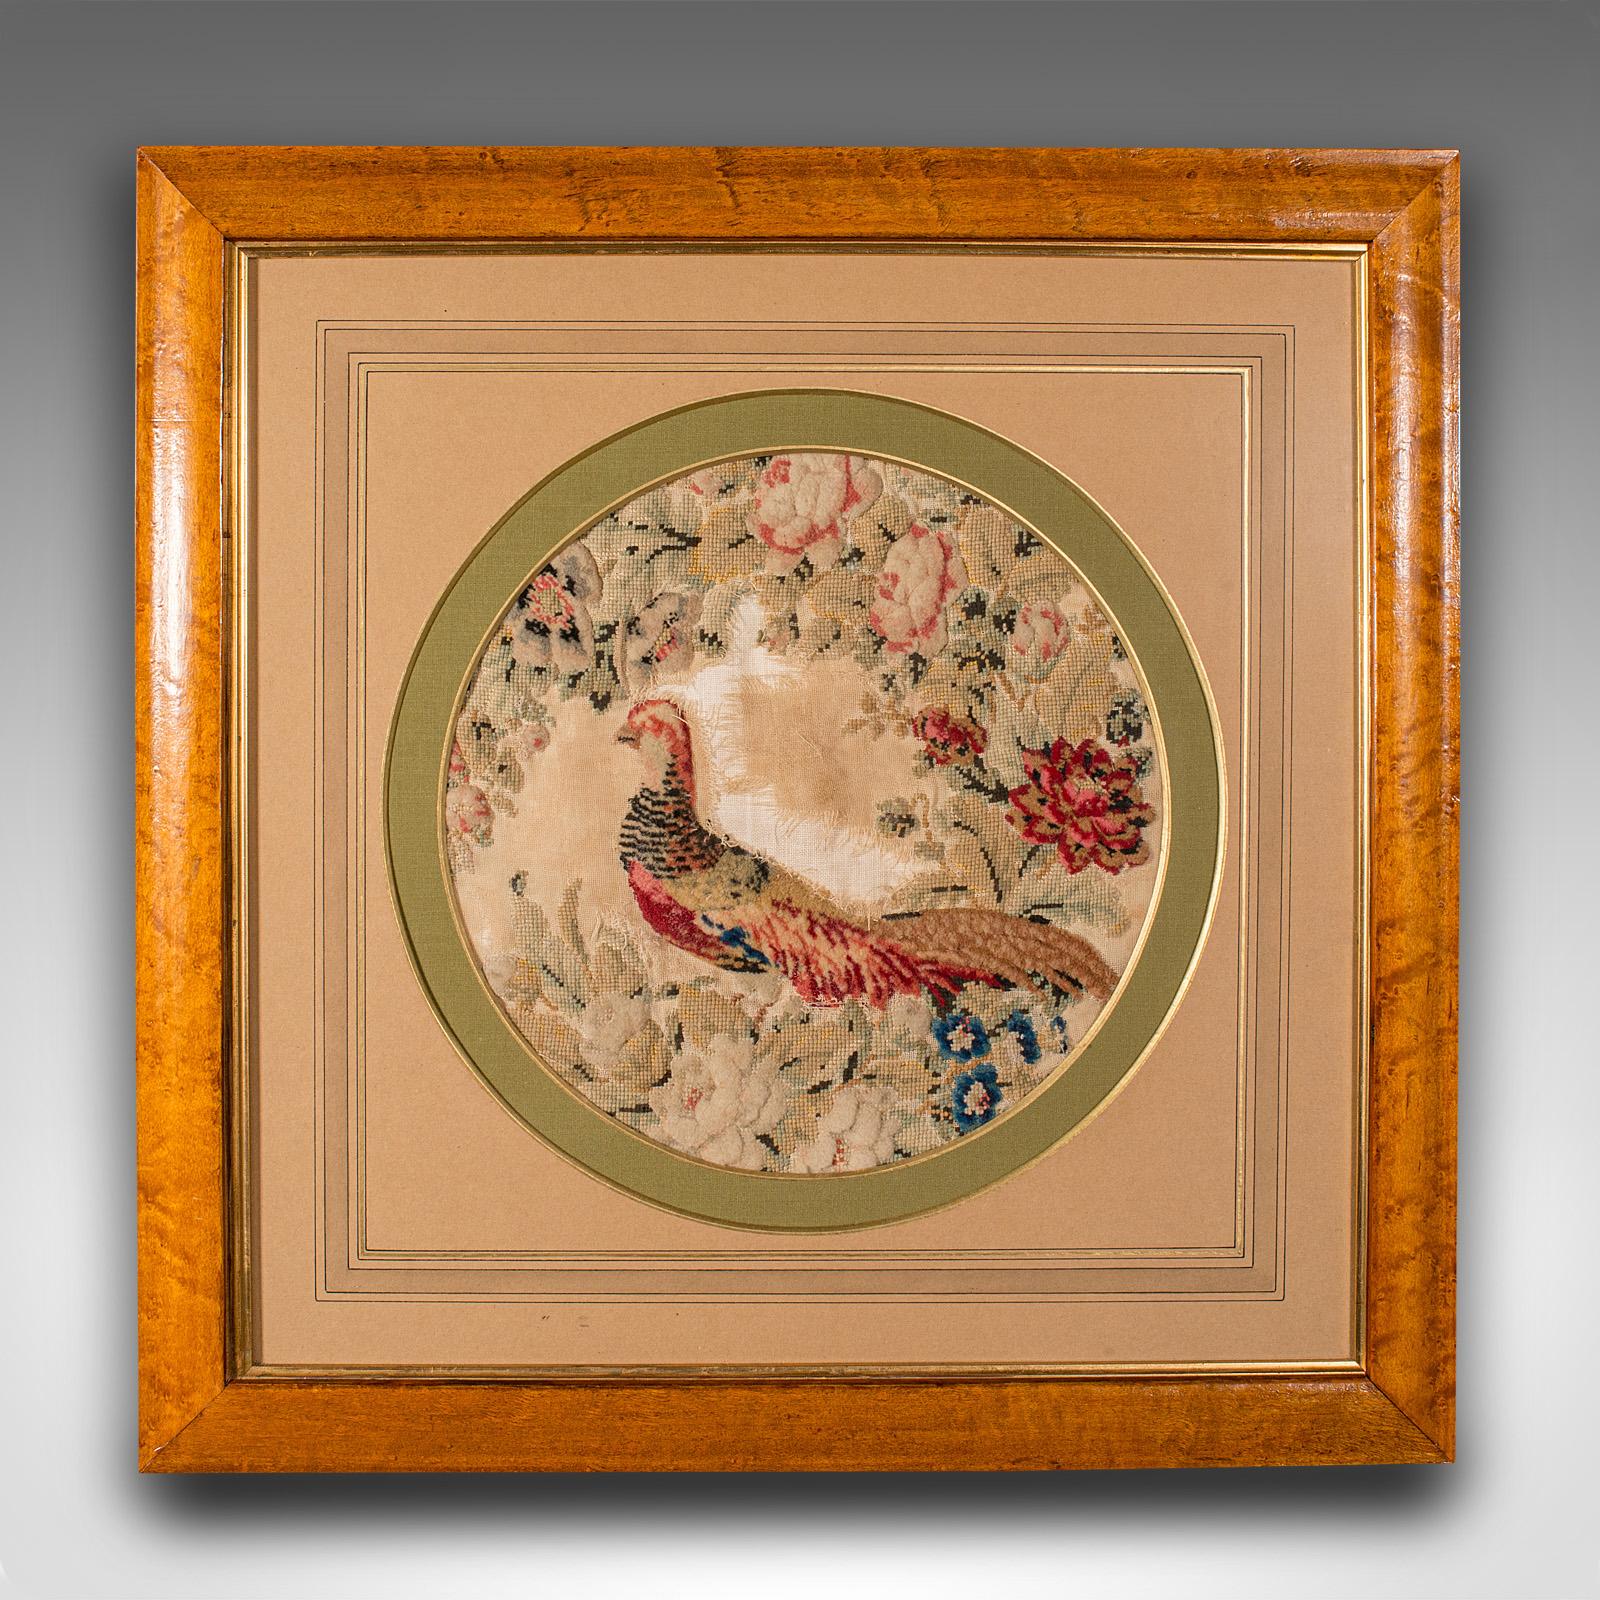 This is an antique framed needlepoint scene. An English, stump work tapestry panel, dating to the Victorian period and later, circa 1870.

Beautifully presented and professionally mounted tapestry scene
Displays a desirable aged patina with minor